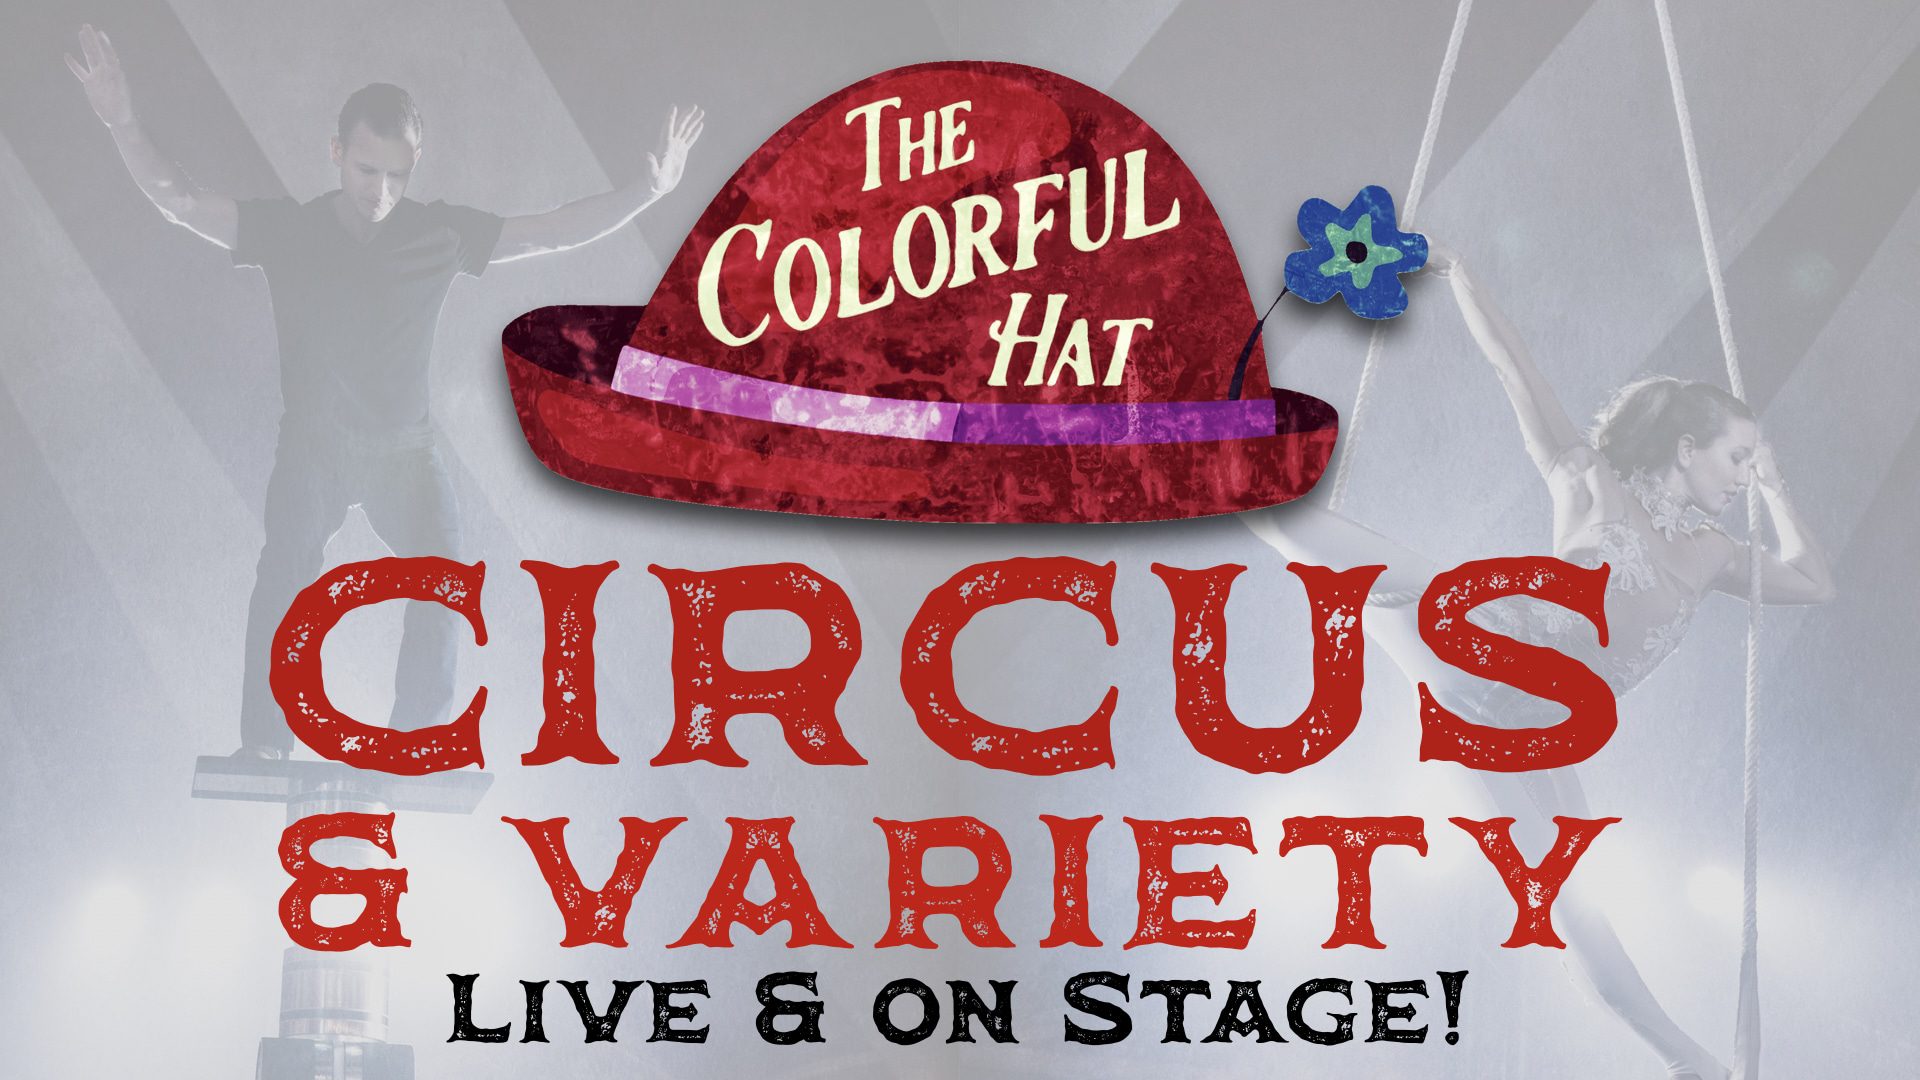 Family events in Franklin, TN, The Colorful Hat, Circus & Variety Live & On Stage at The Franklin Theatre.